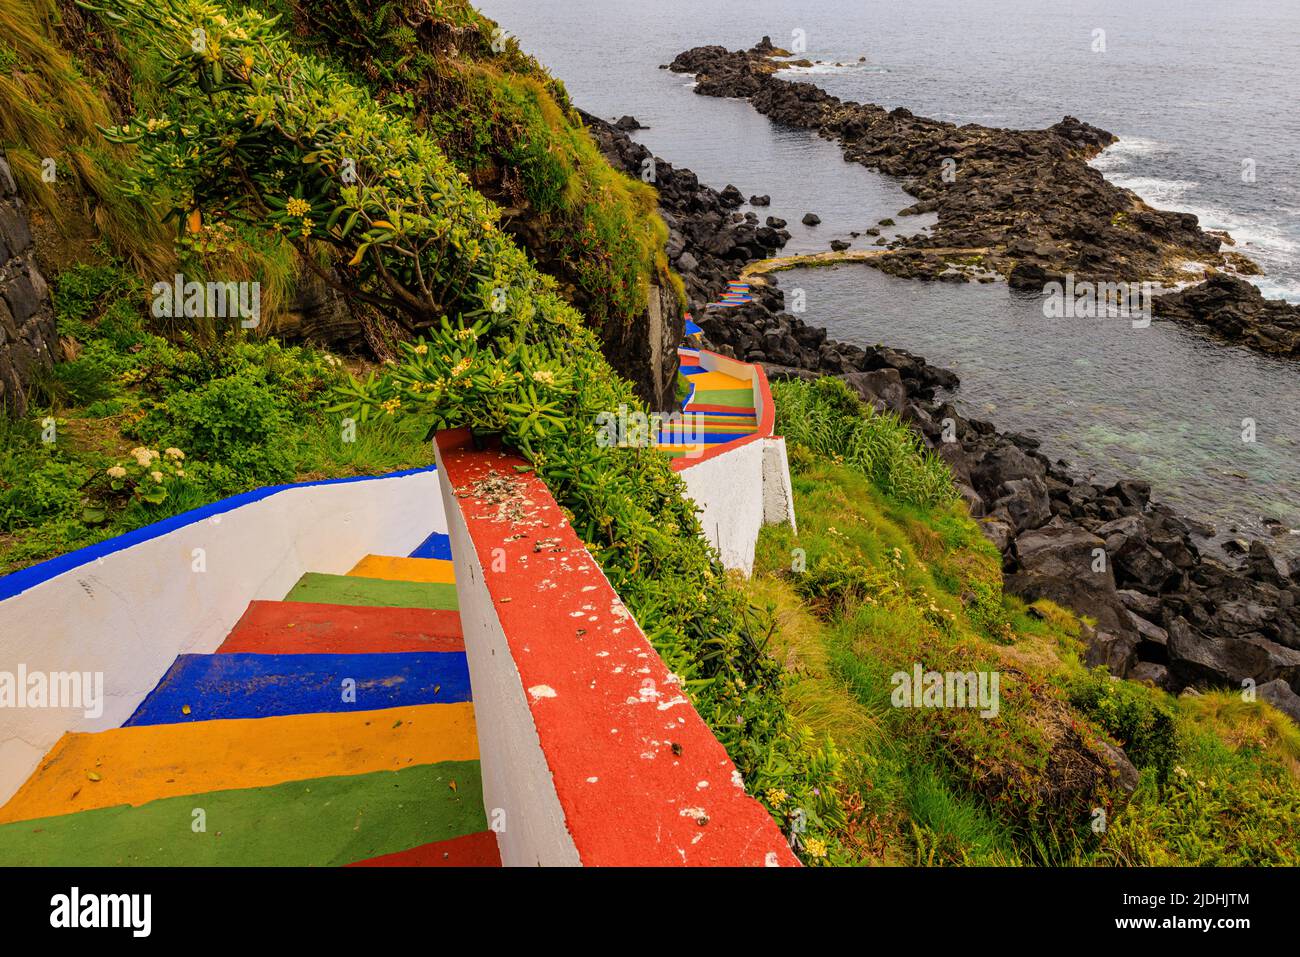 rainbow steps wind their way down to black volcanic rocks and calm sea at miradouro melo nunes Maia sao miguel azores Stock Photo